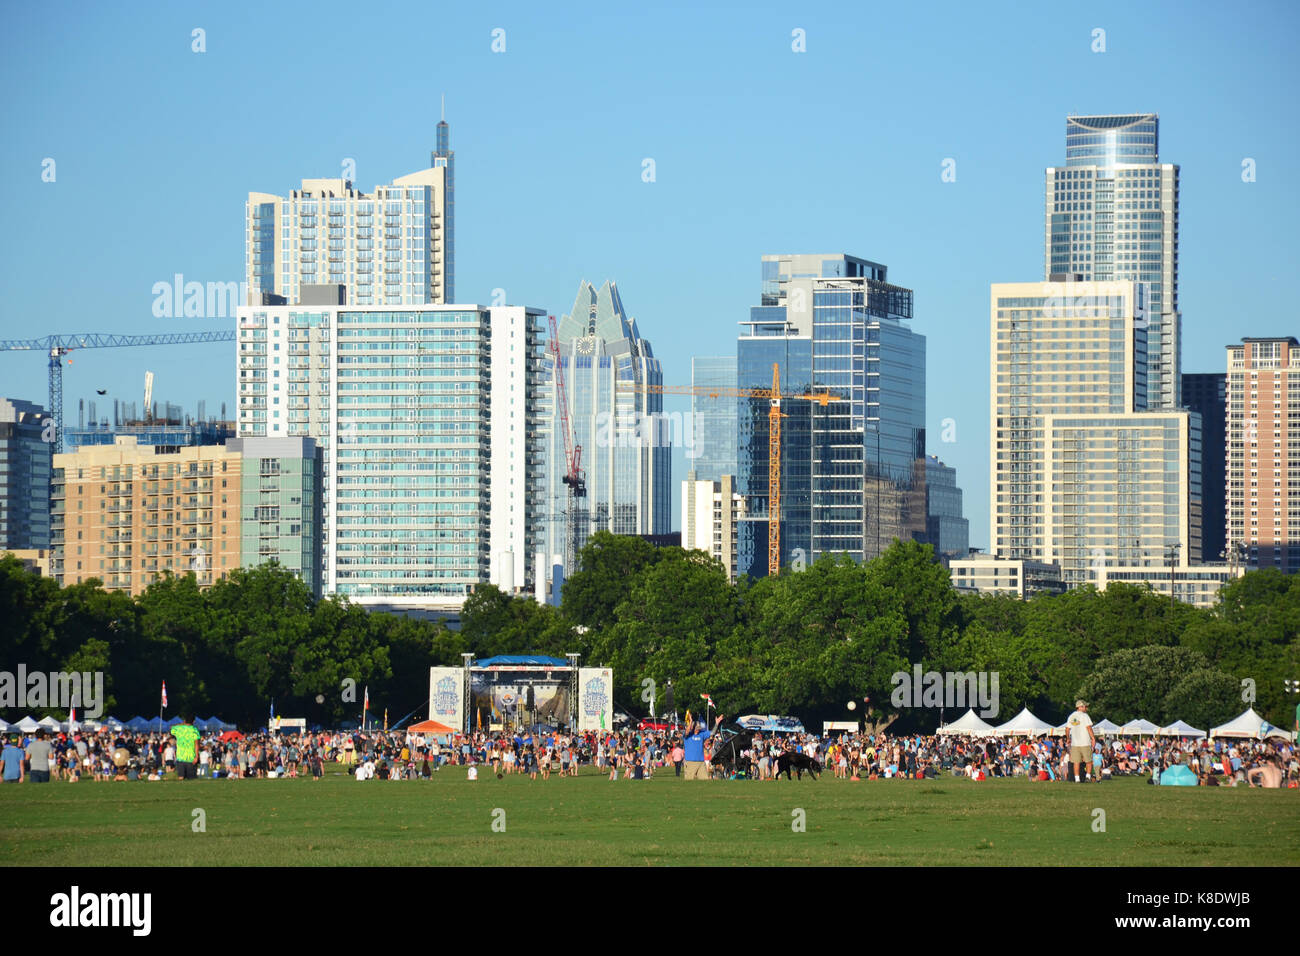 Open-air concert in park, downtown Austin, Texas Stock Photo